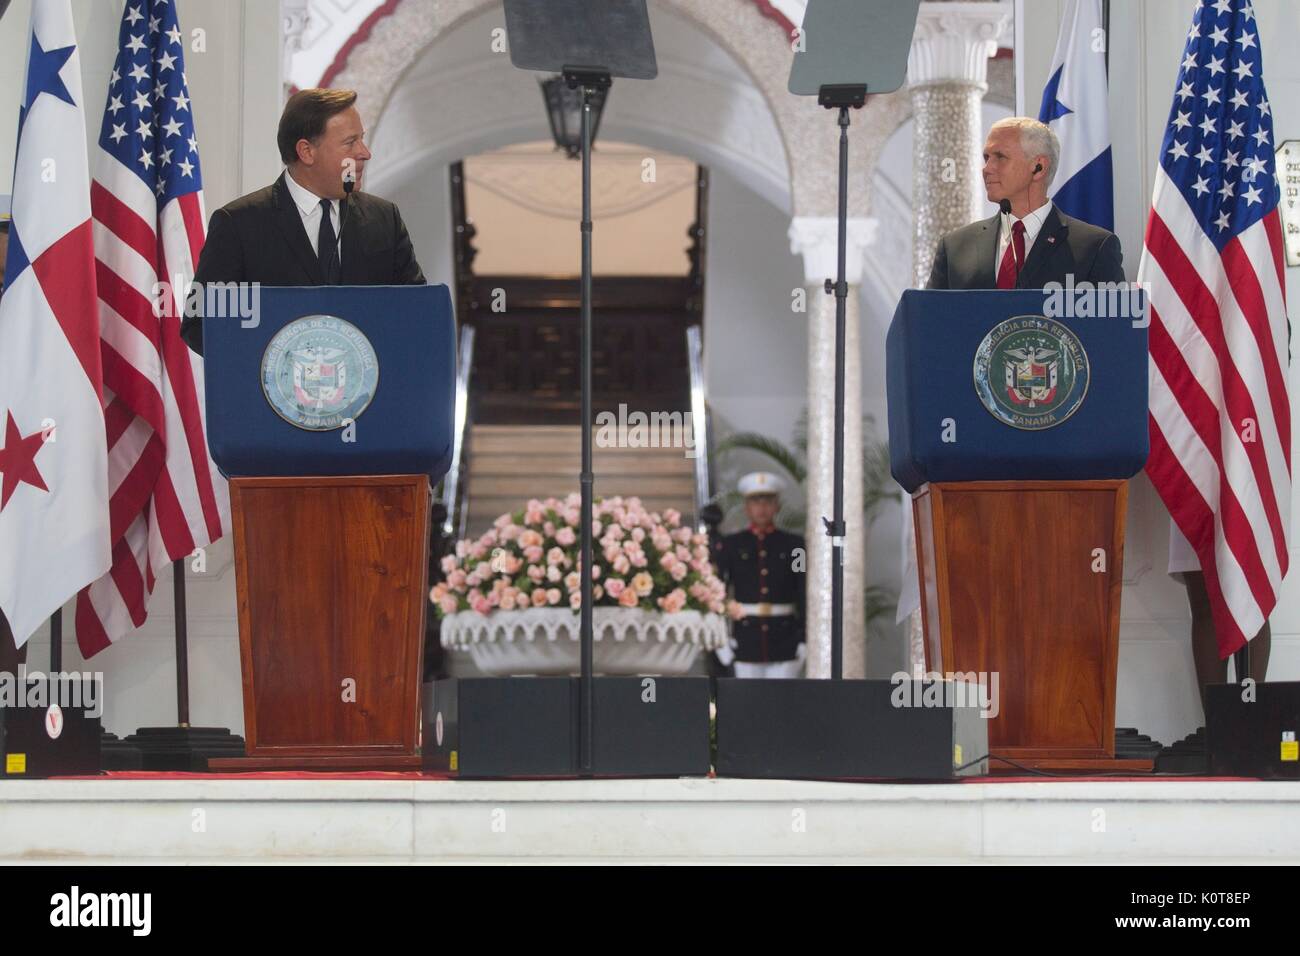 U.S. Vice President Mike Pence, right, during a joint press conference with Panamian President Juan Carlos Varela, at the presidential palace August 17, 2017 in Panama City, Panama. Pence is on a week-long tour of Latin America. Stock Photo